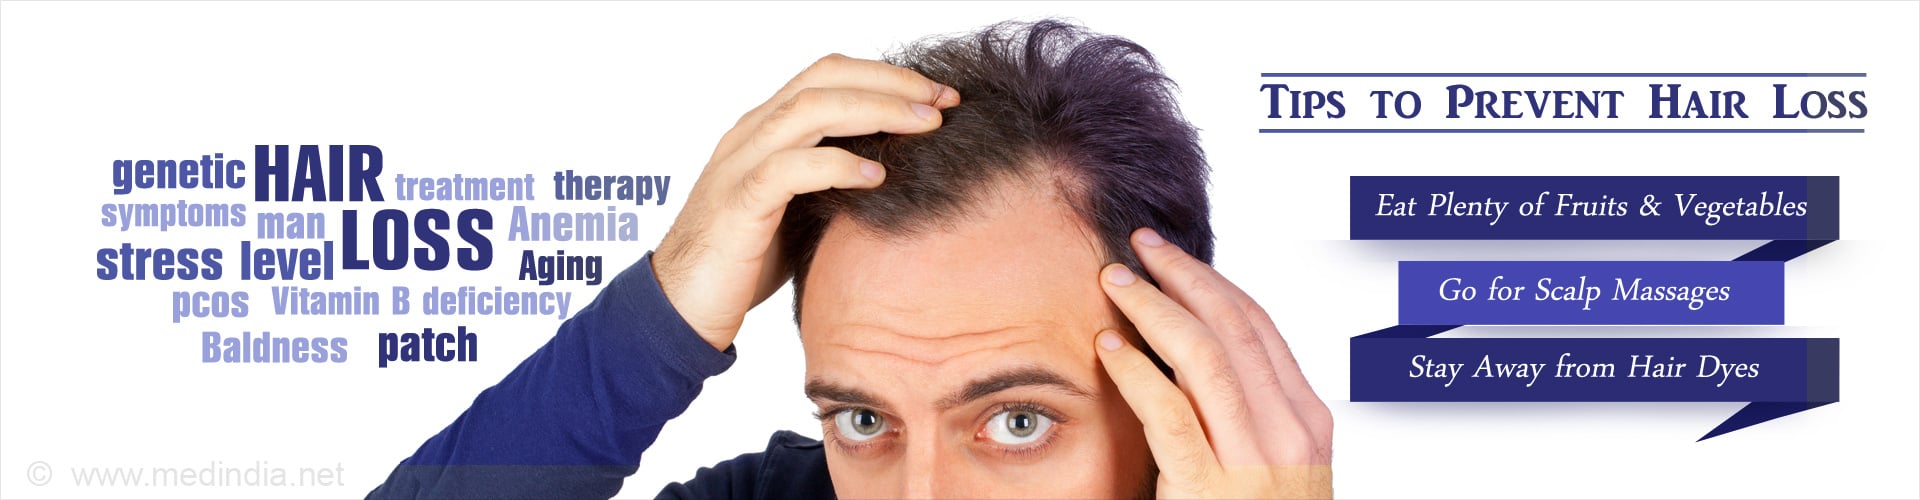 Tips to Prevent Hair Loss, Eat Plenty of Fruits and Vegetables, Go for Scalp Massages, Stay Away from Hair Dyes